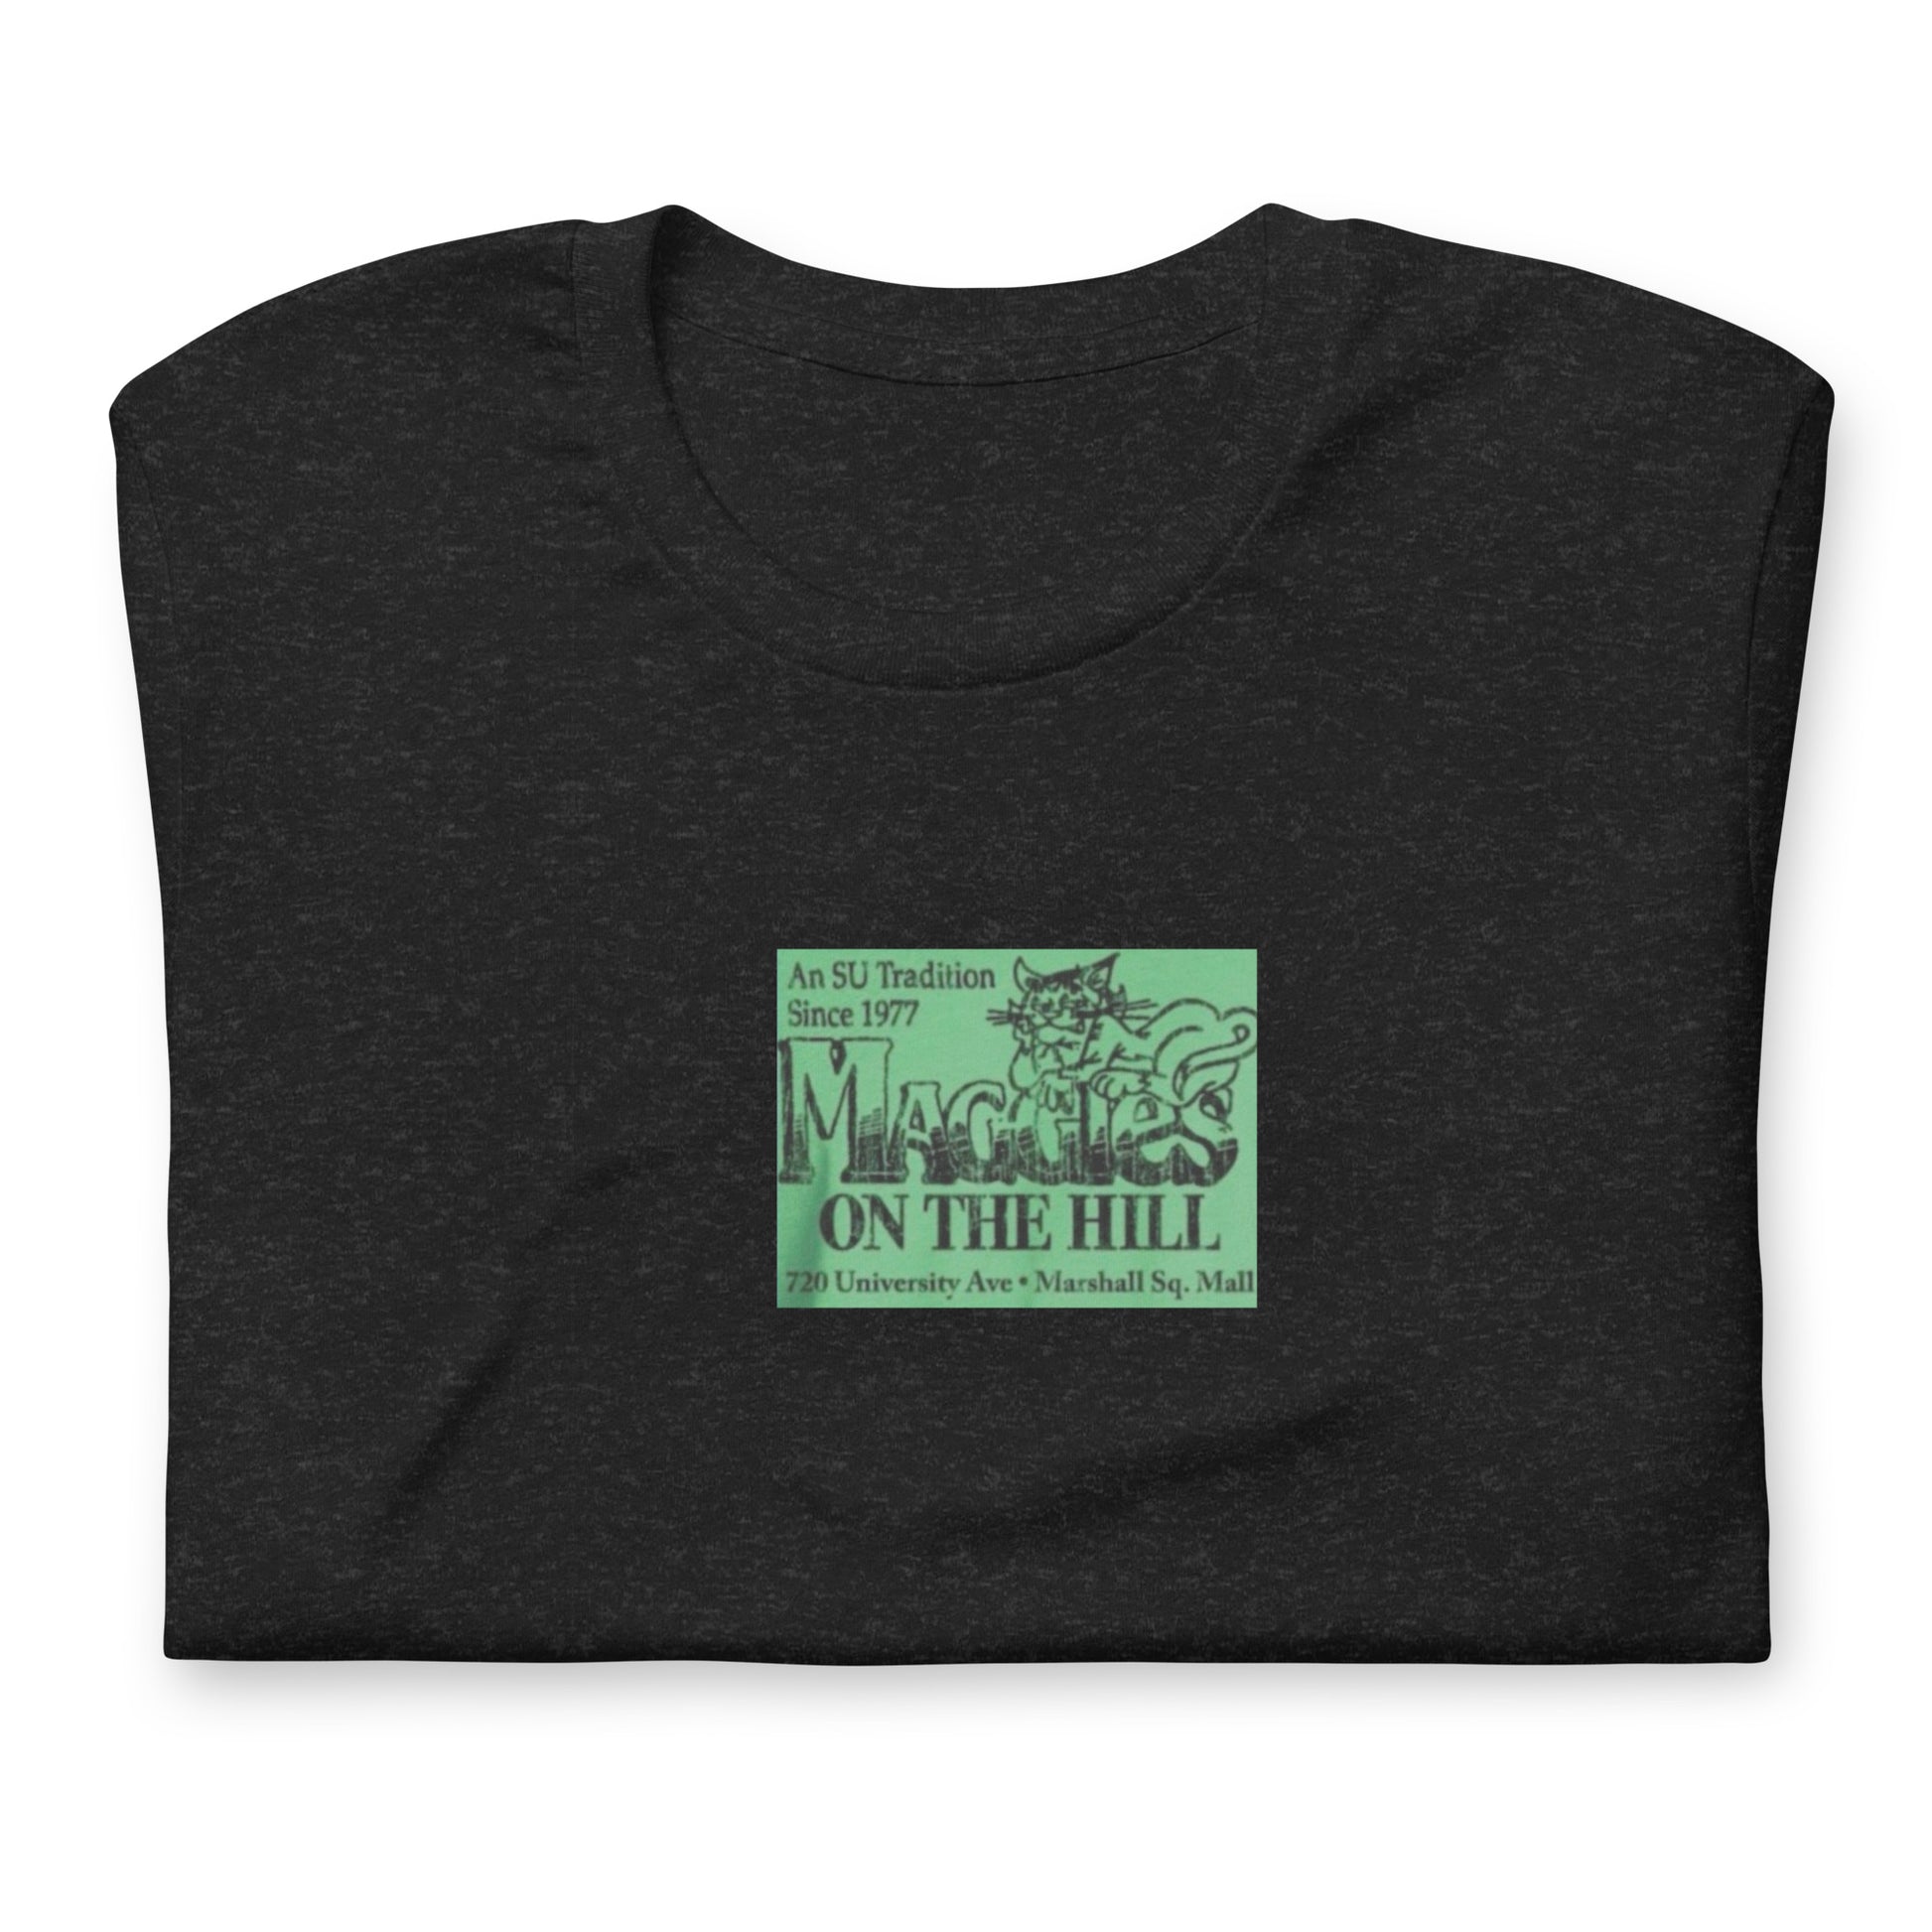 Black unisex graphic tee shirt that says 'Maggie's on the Hill' in green and black in the center